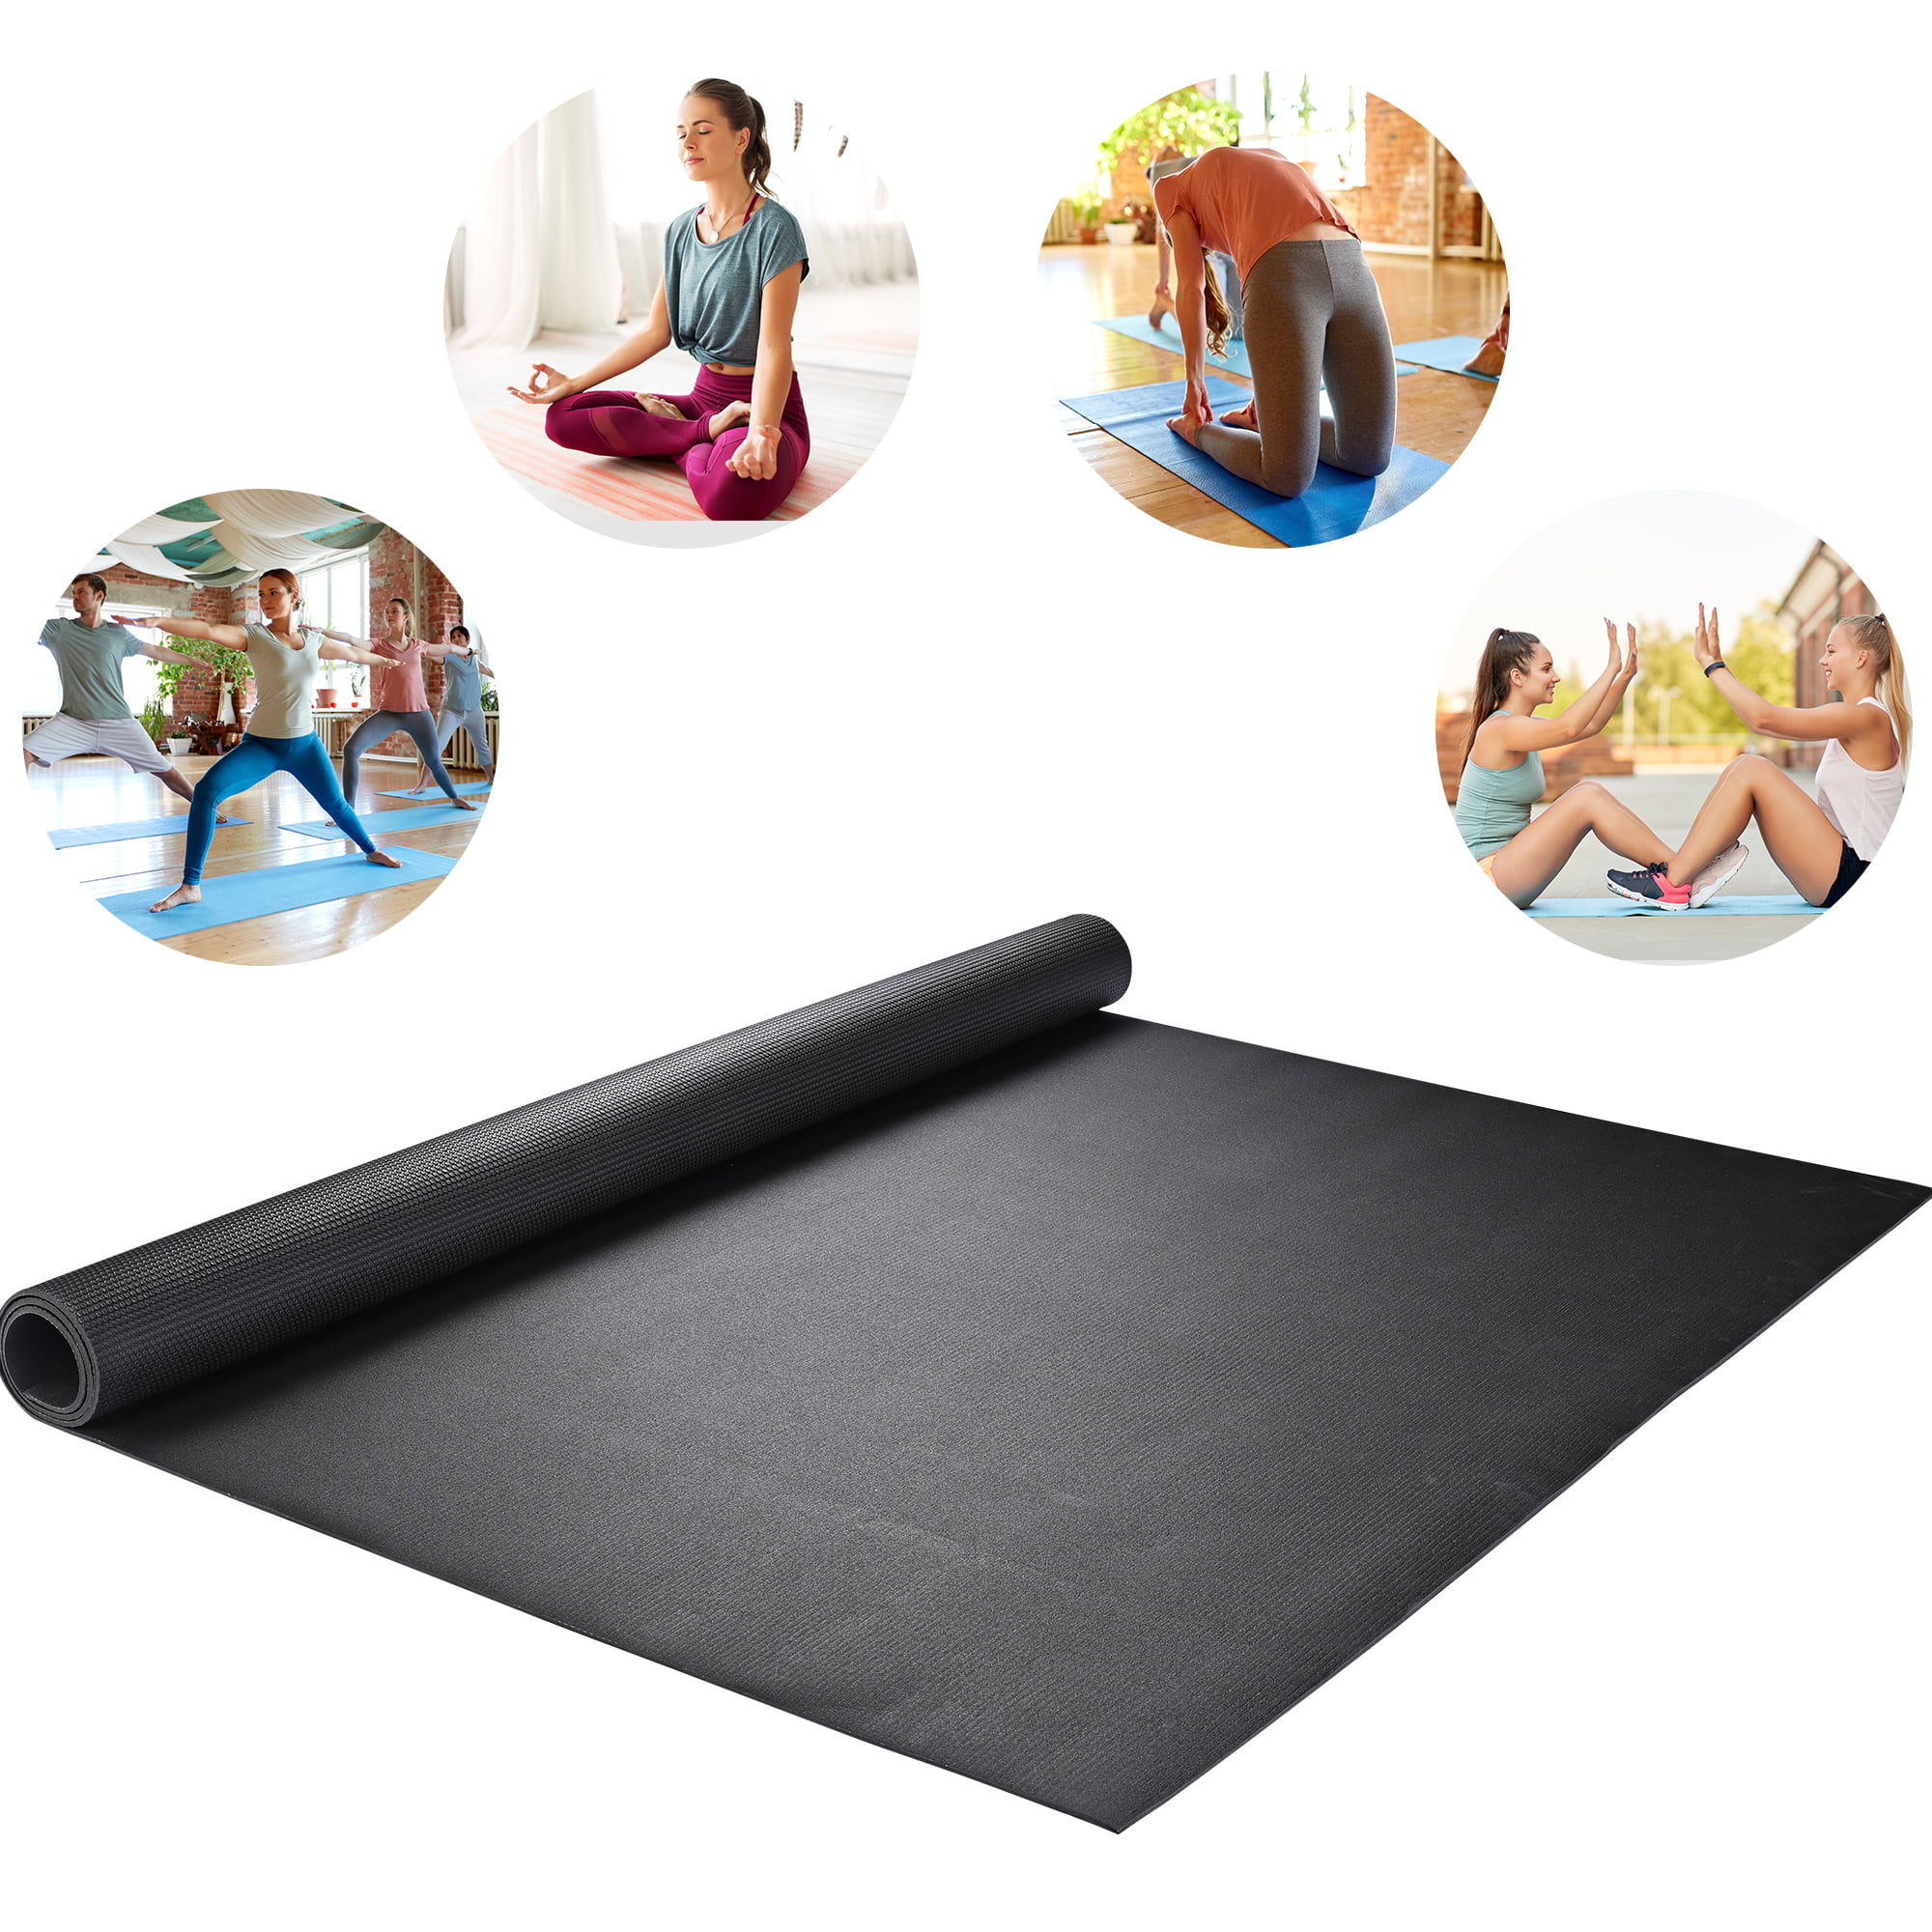  GymCope Large Exercise Mat for Home Workout,10'x6'/9